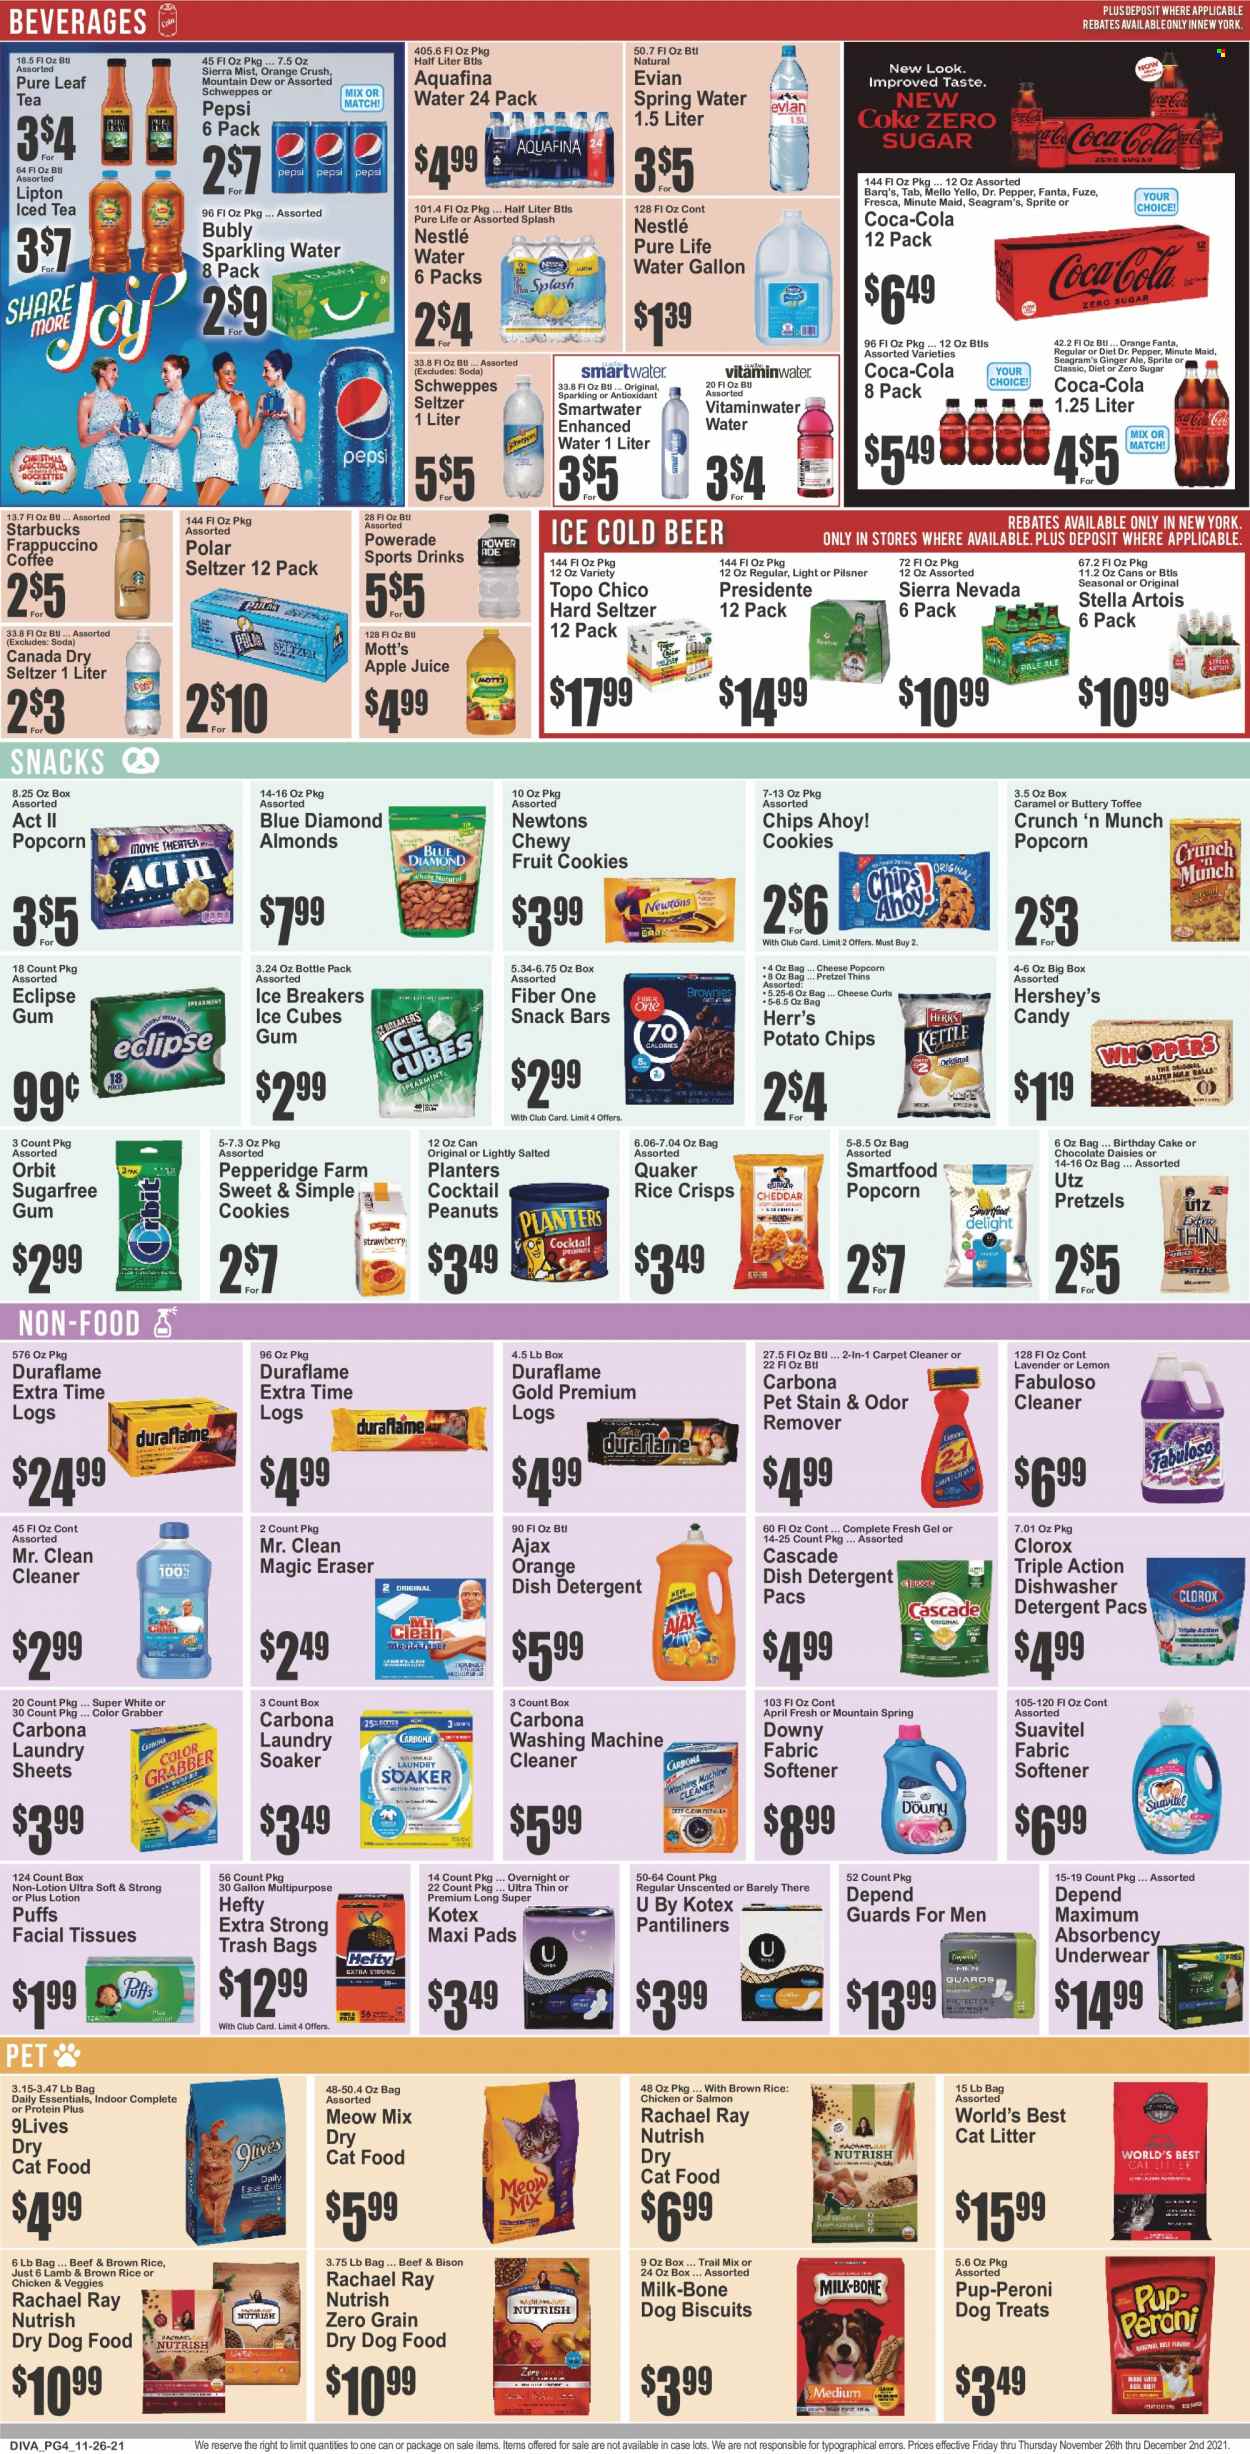 thumbnail - Key Food Flyer - 11/26/2021 - 12/02/2021 - Sales products - pretzels, cake, puffs, oranges, Mott's, Quaker, cheese, milk, Hershey's, cookies, Nestlé, chocolate, ice cubes gum, Orbit, toffee, Chips Ahoy!, snack bar, potato chips, chips, Smartfood, Thins, popcorn, rice crisps, Fiber One, almonds, peanuts, Planters, Blue Diamond, trail mix, apple juice, Canada Dry, Coca-Cola, ginger ale, Mountain Dew, Schweppes, Sprite, Powerade, Pepsi, juice, Fanta, Lipton, ice tea, Dr. Pepper, Sierra Mist, fruit punch, Aquafina, spring water, soda, sparkling water, Pure Life Water, Smartwater, Evian, Pure Leaf, coffee, Starbucks, frappuccino, Hard Seltzer, beer, tissues, detergent, cleaner, washing machine cleaner, Clorox, Carbona, Ajax, Fabuloso, Cascade, fabric softener, Downy Laundry, pantiliners, sanitary pads, Kotex, facial tissues, Hefty, trash bags, cat litter, animal food, animal treats, cat food, dog food, dog biscuits, 9lives, dry dog food, dry cat food, Pup-Peroni, Meow Mix, Nutrish, Stella Artois. Page 4.